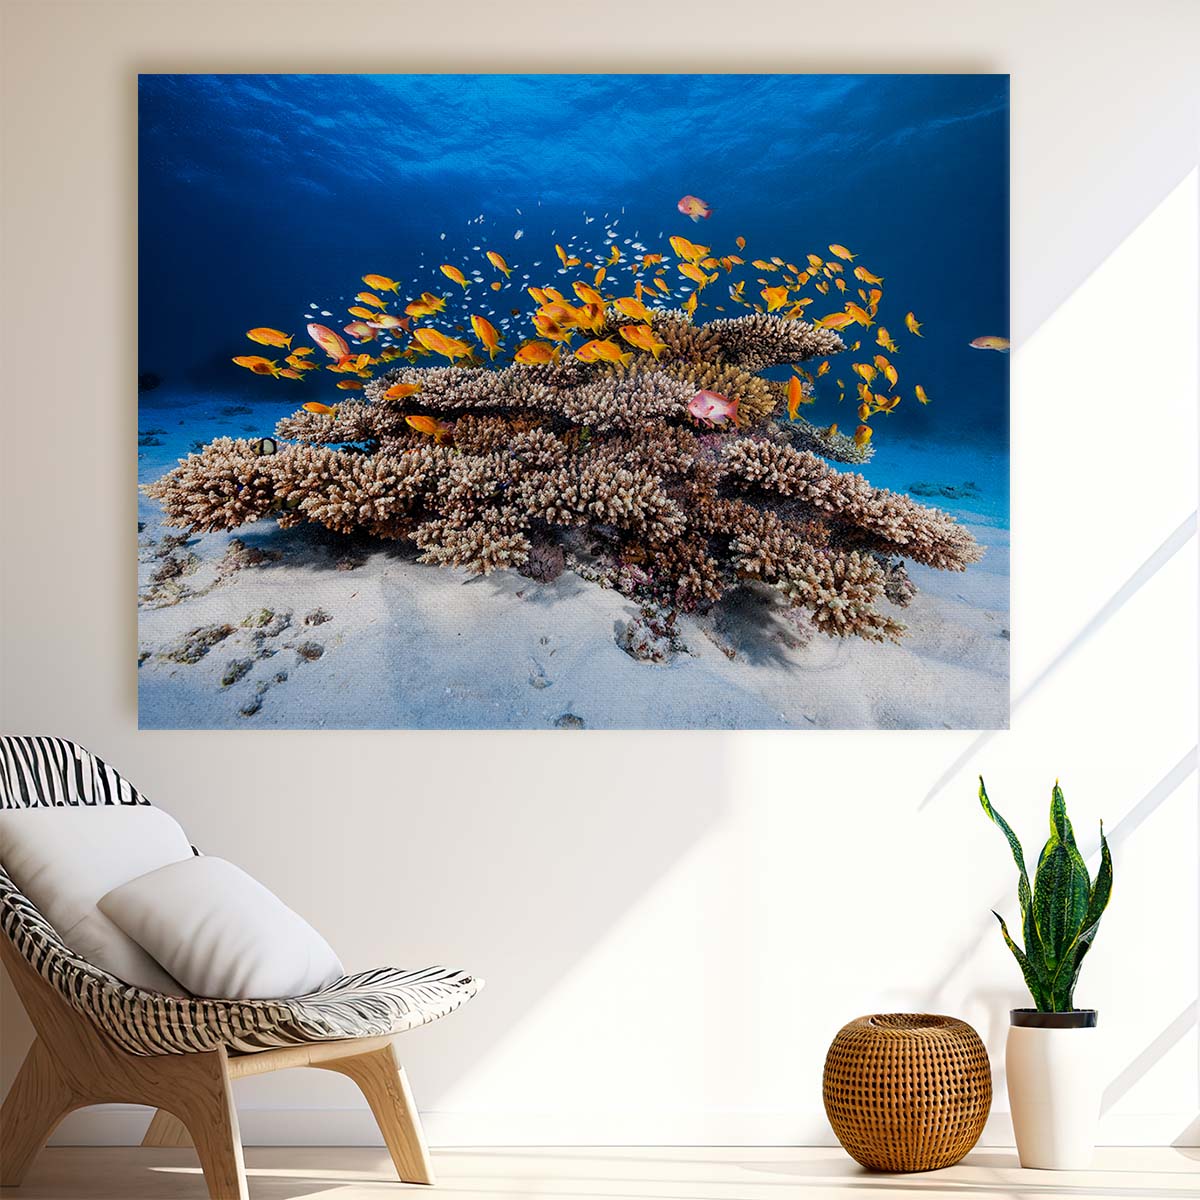 Vibrant Underwater Coral Reef & Fish Landscape Wall Art by Luxuriance Designs. Made in USA.